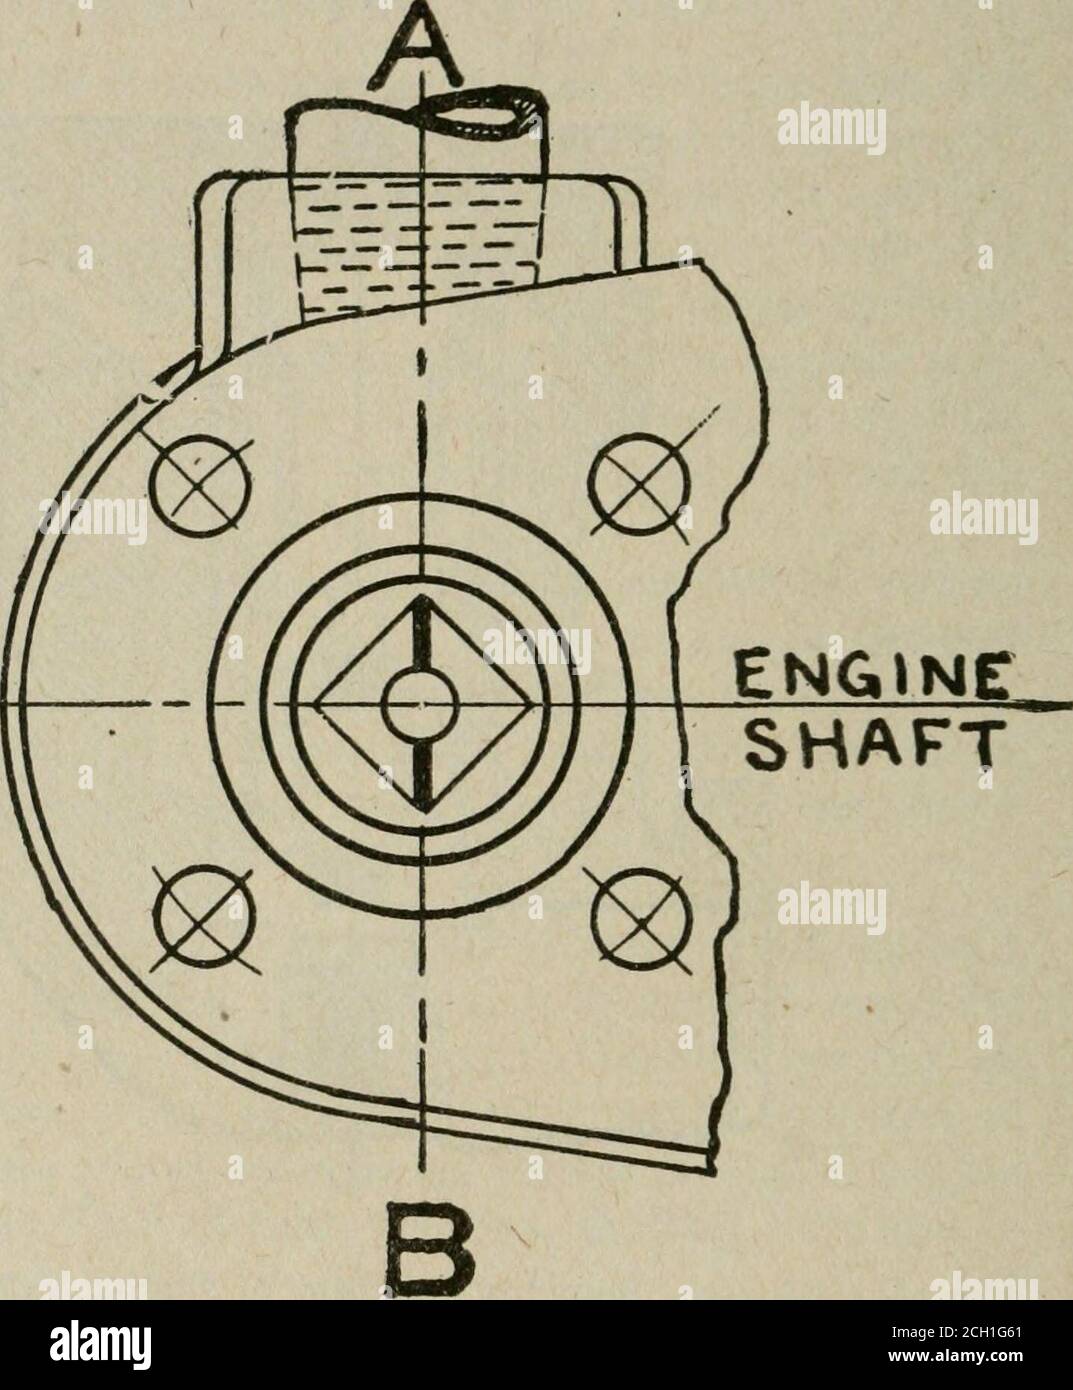 . Science of railways . Fig. 11—Diagram, Showing Position of Piston Valve, when Settingby Using 3/16-inch Dimension from Top of Cylinder 120 LOCOMOTIVE APPLIANCES. Care should be taken in all cases to see that the top ofvalve bushing is exactly flush with top of cylinder as shownin Fig. 11. Before tightening lock nuts on valve stem, care should cEntfp UME OF. Fig. 12—Top View of Valve, Showing Cut in End of Valve Bod;Right Angles to Center Line of Engine Shaft at be taken to see that valve wrist pin is in line with engineshaft. This will be indicated by the heavy cut in top of valvebody being Stock Photo